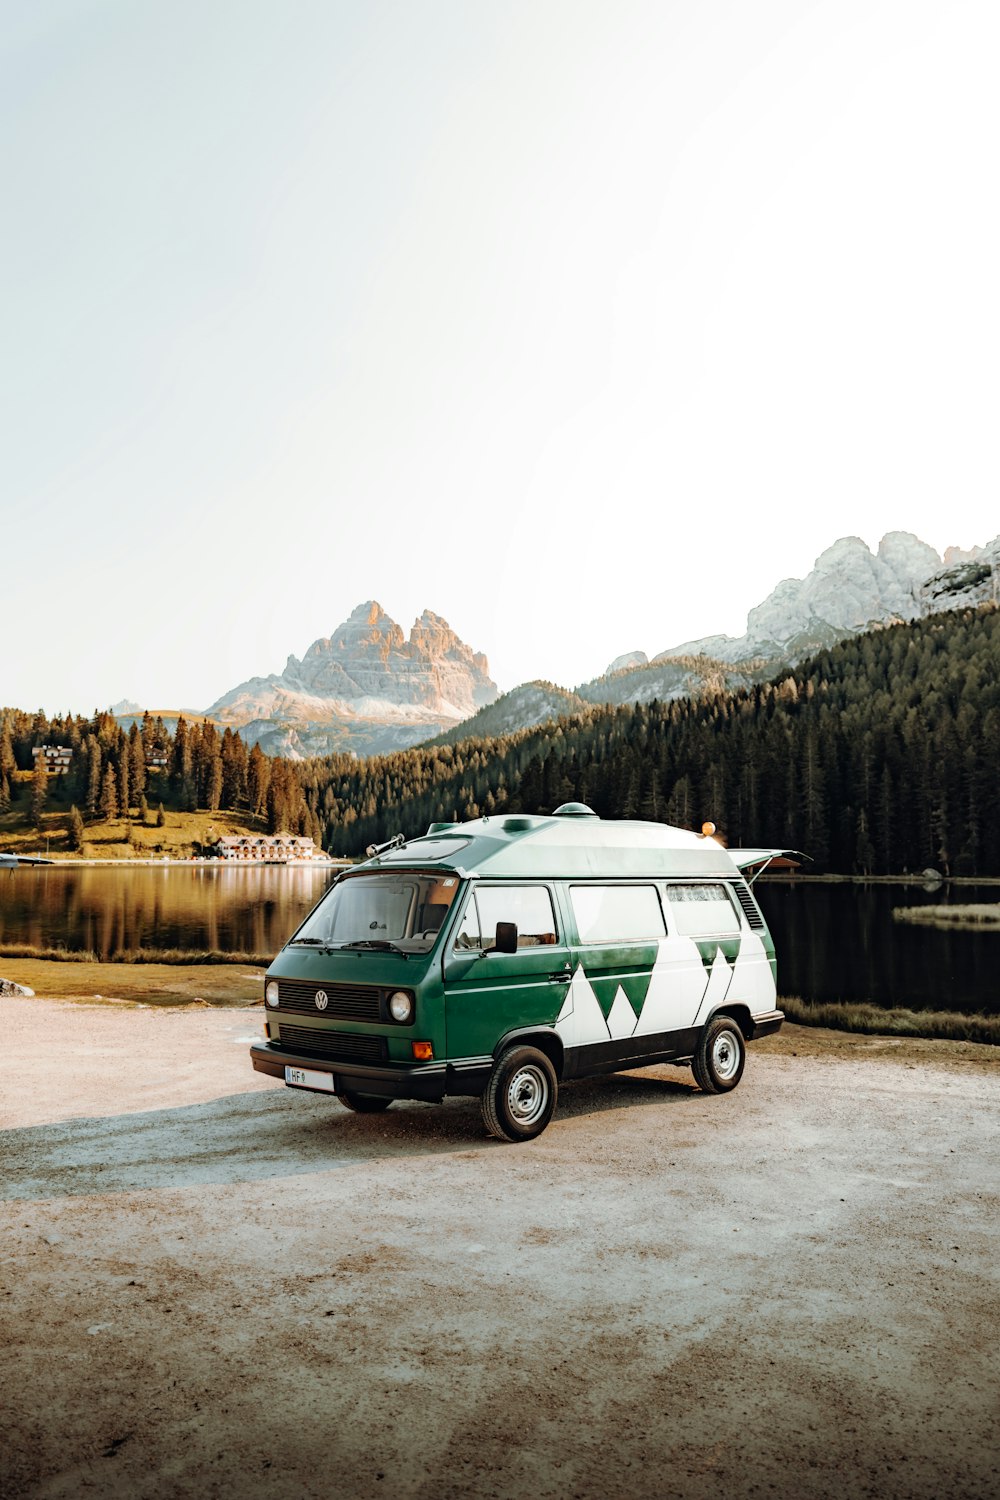 green and white van on road near mountain during daytime